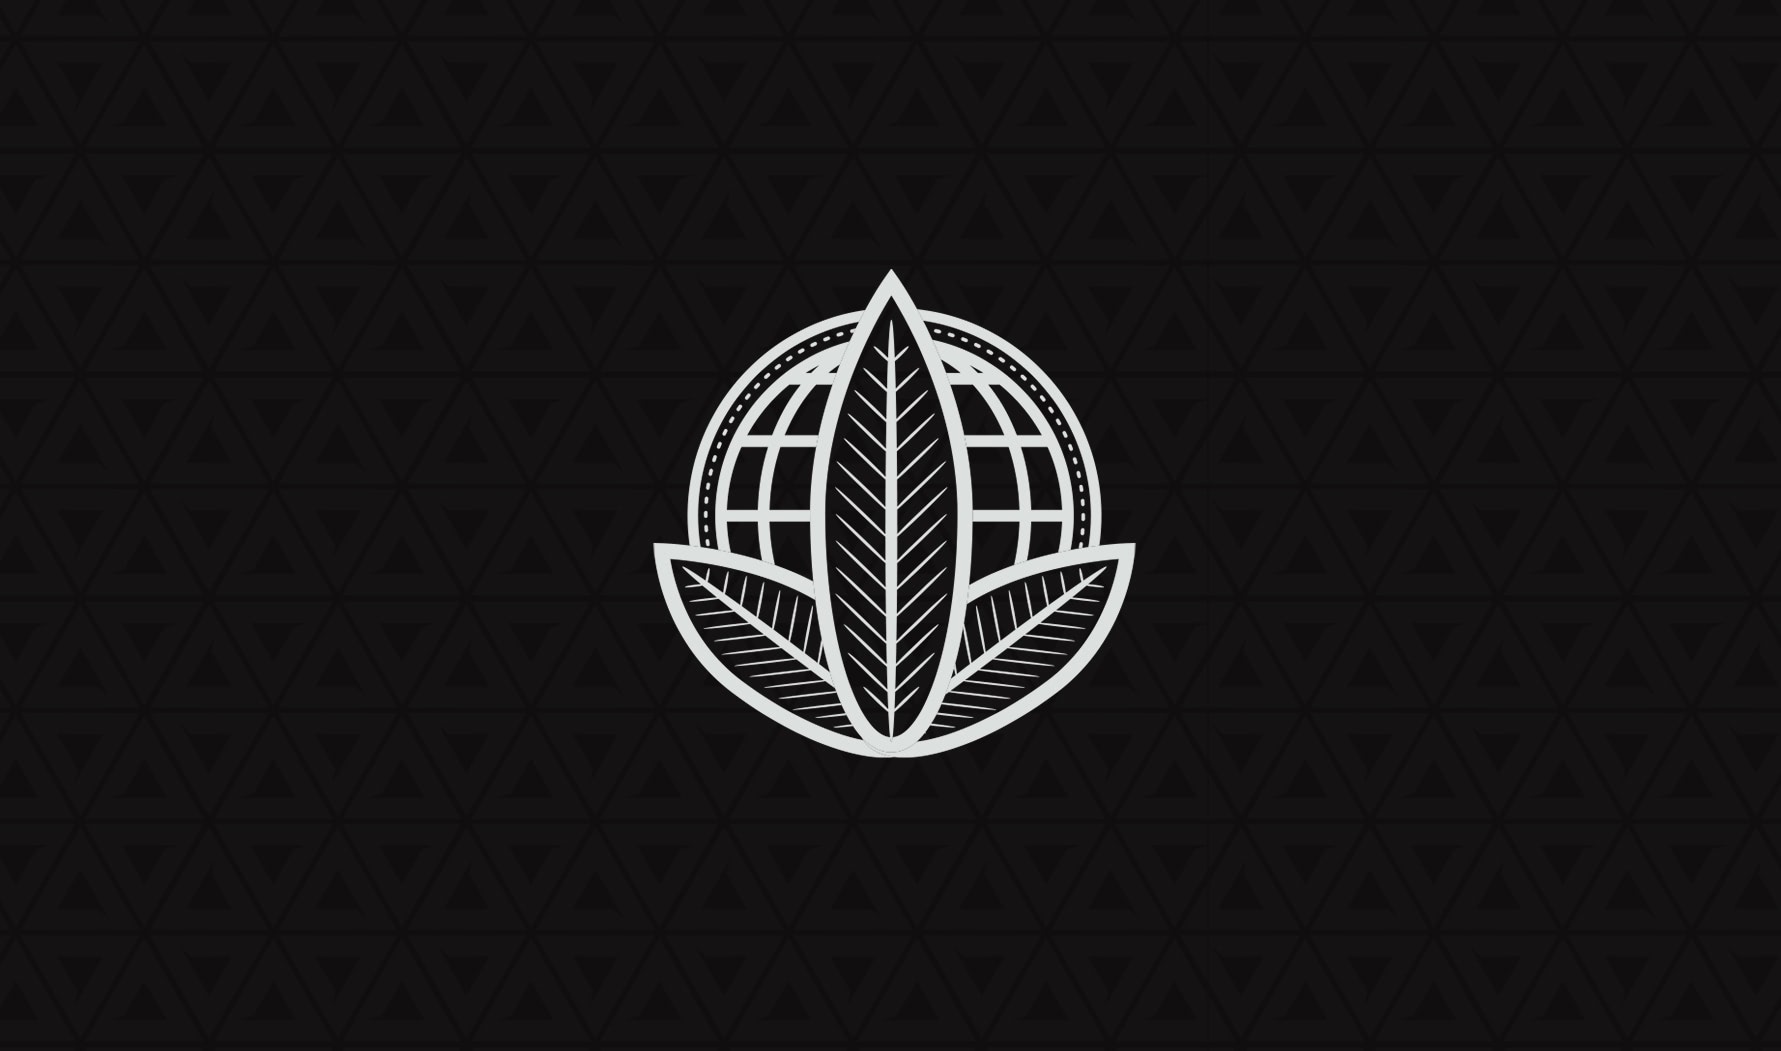 SLANG Worldwide to Acquire Award-Winning Cannabis Brands and Additional US Distribution in Strategic Acquisition of LBA Global Corporation